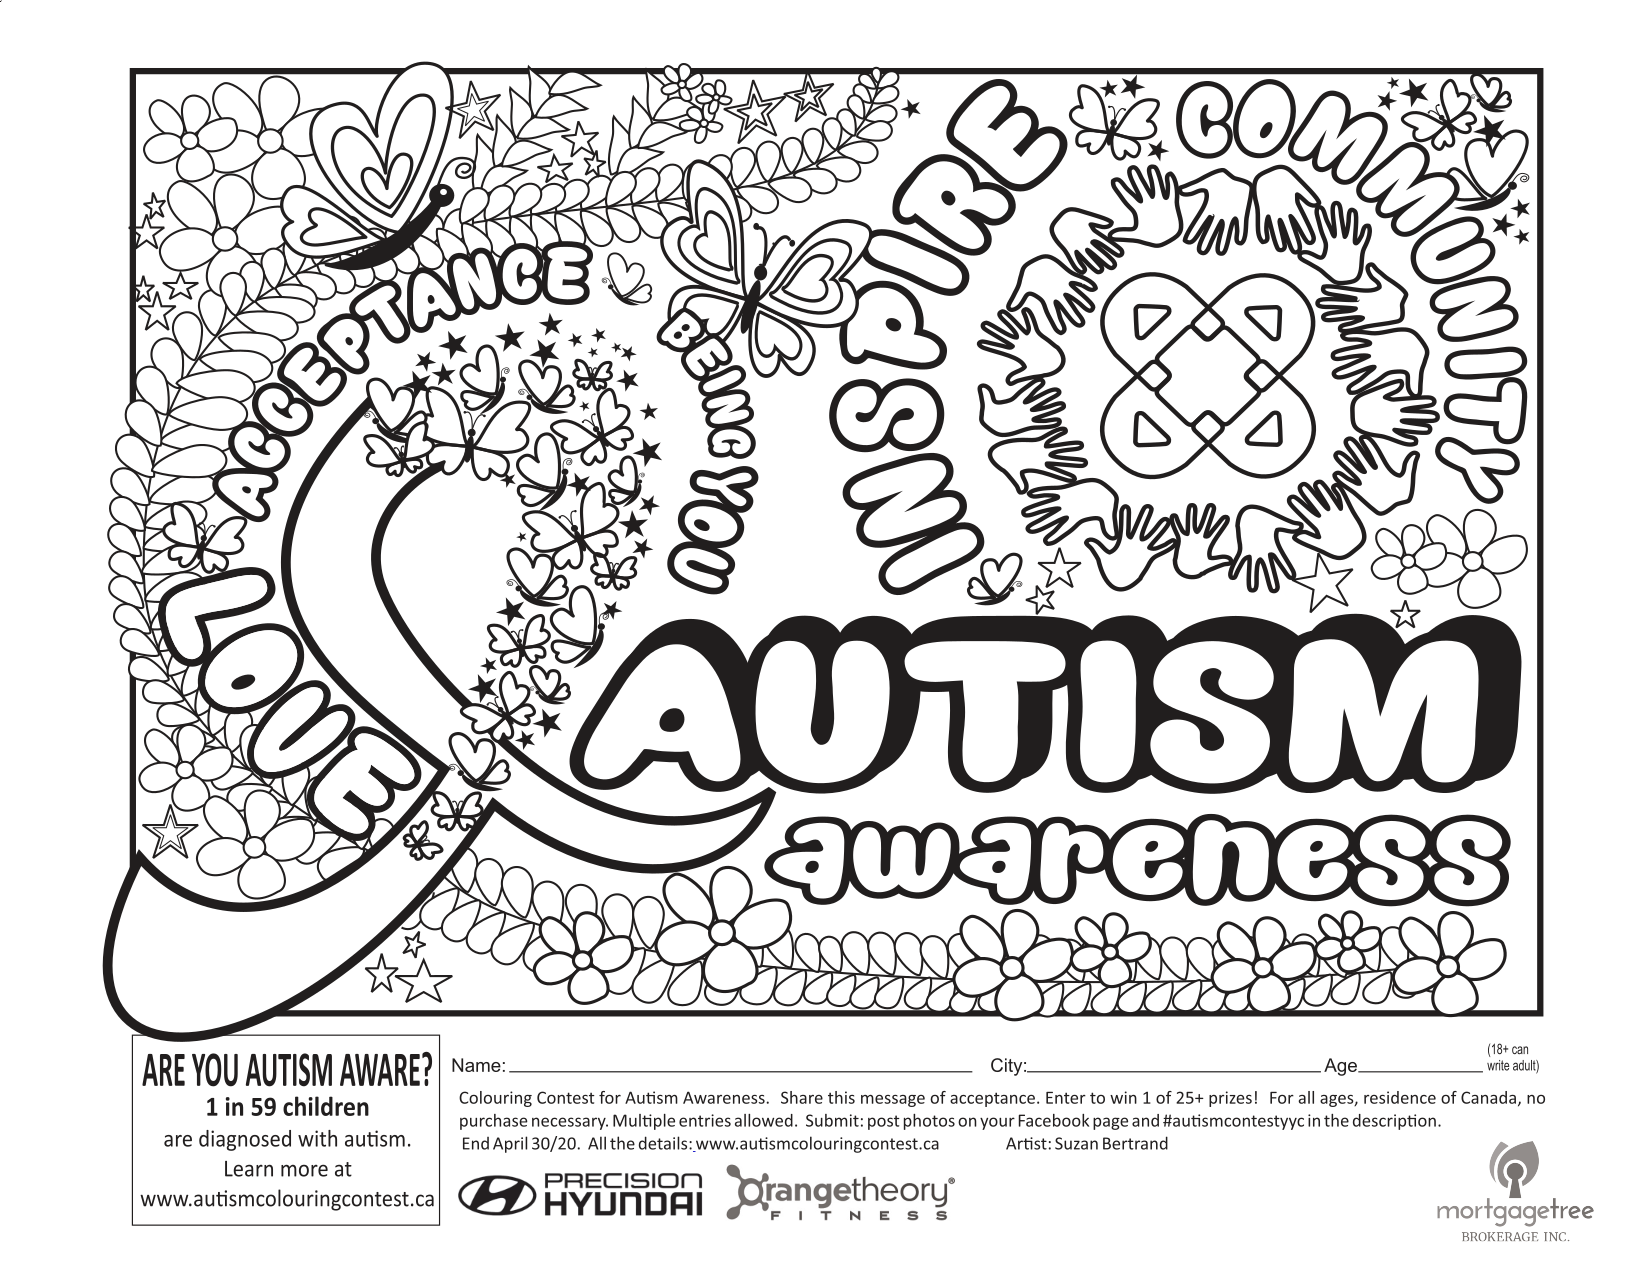 Download autism-awareness-colouring-contest_2020 - Mortgage Tree